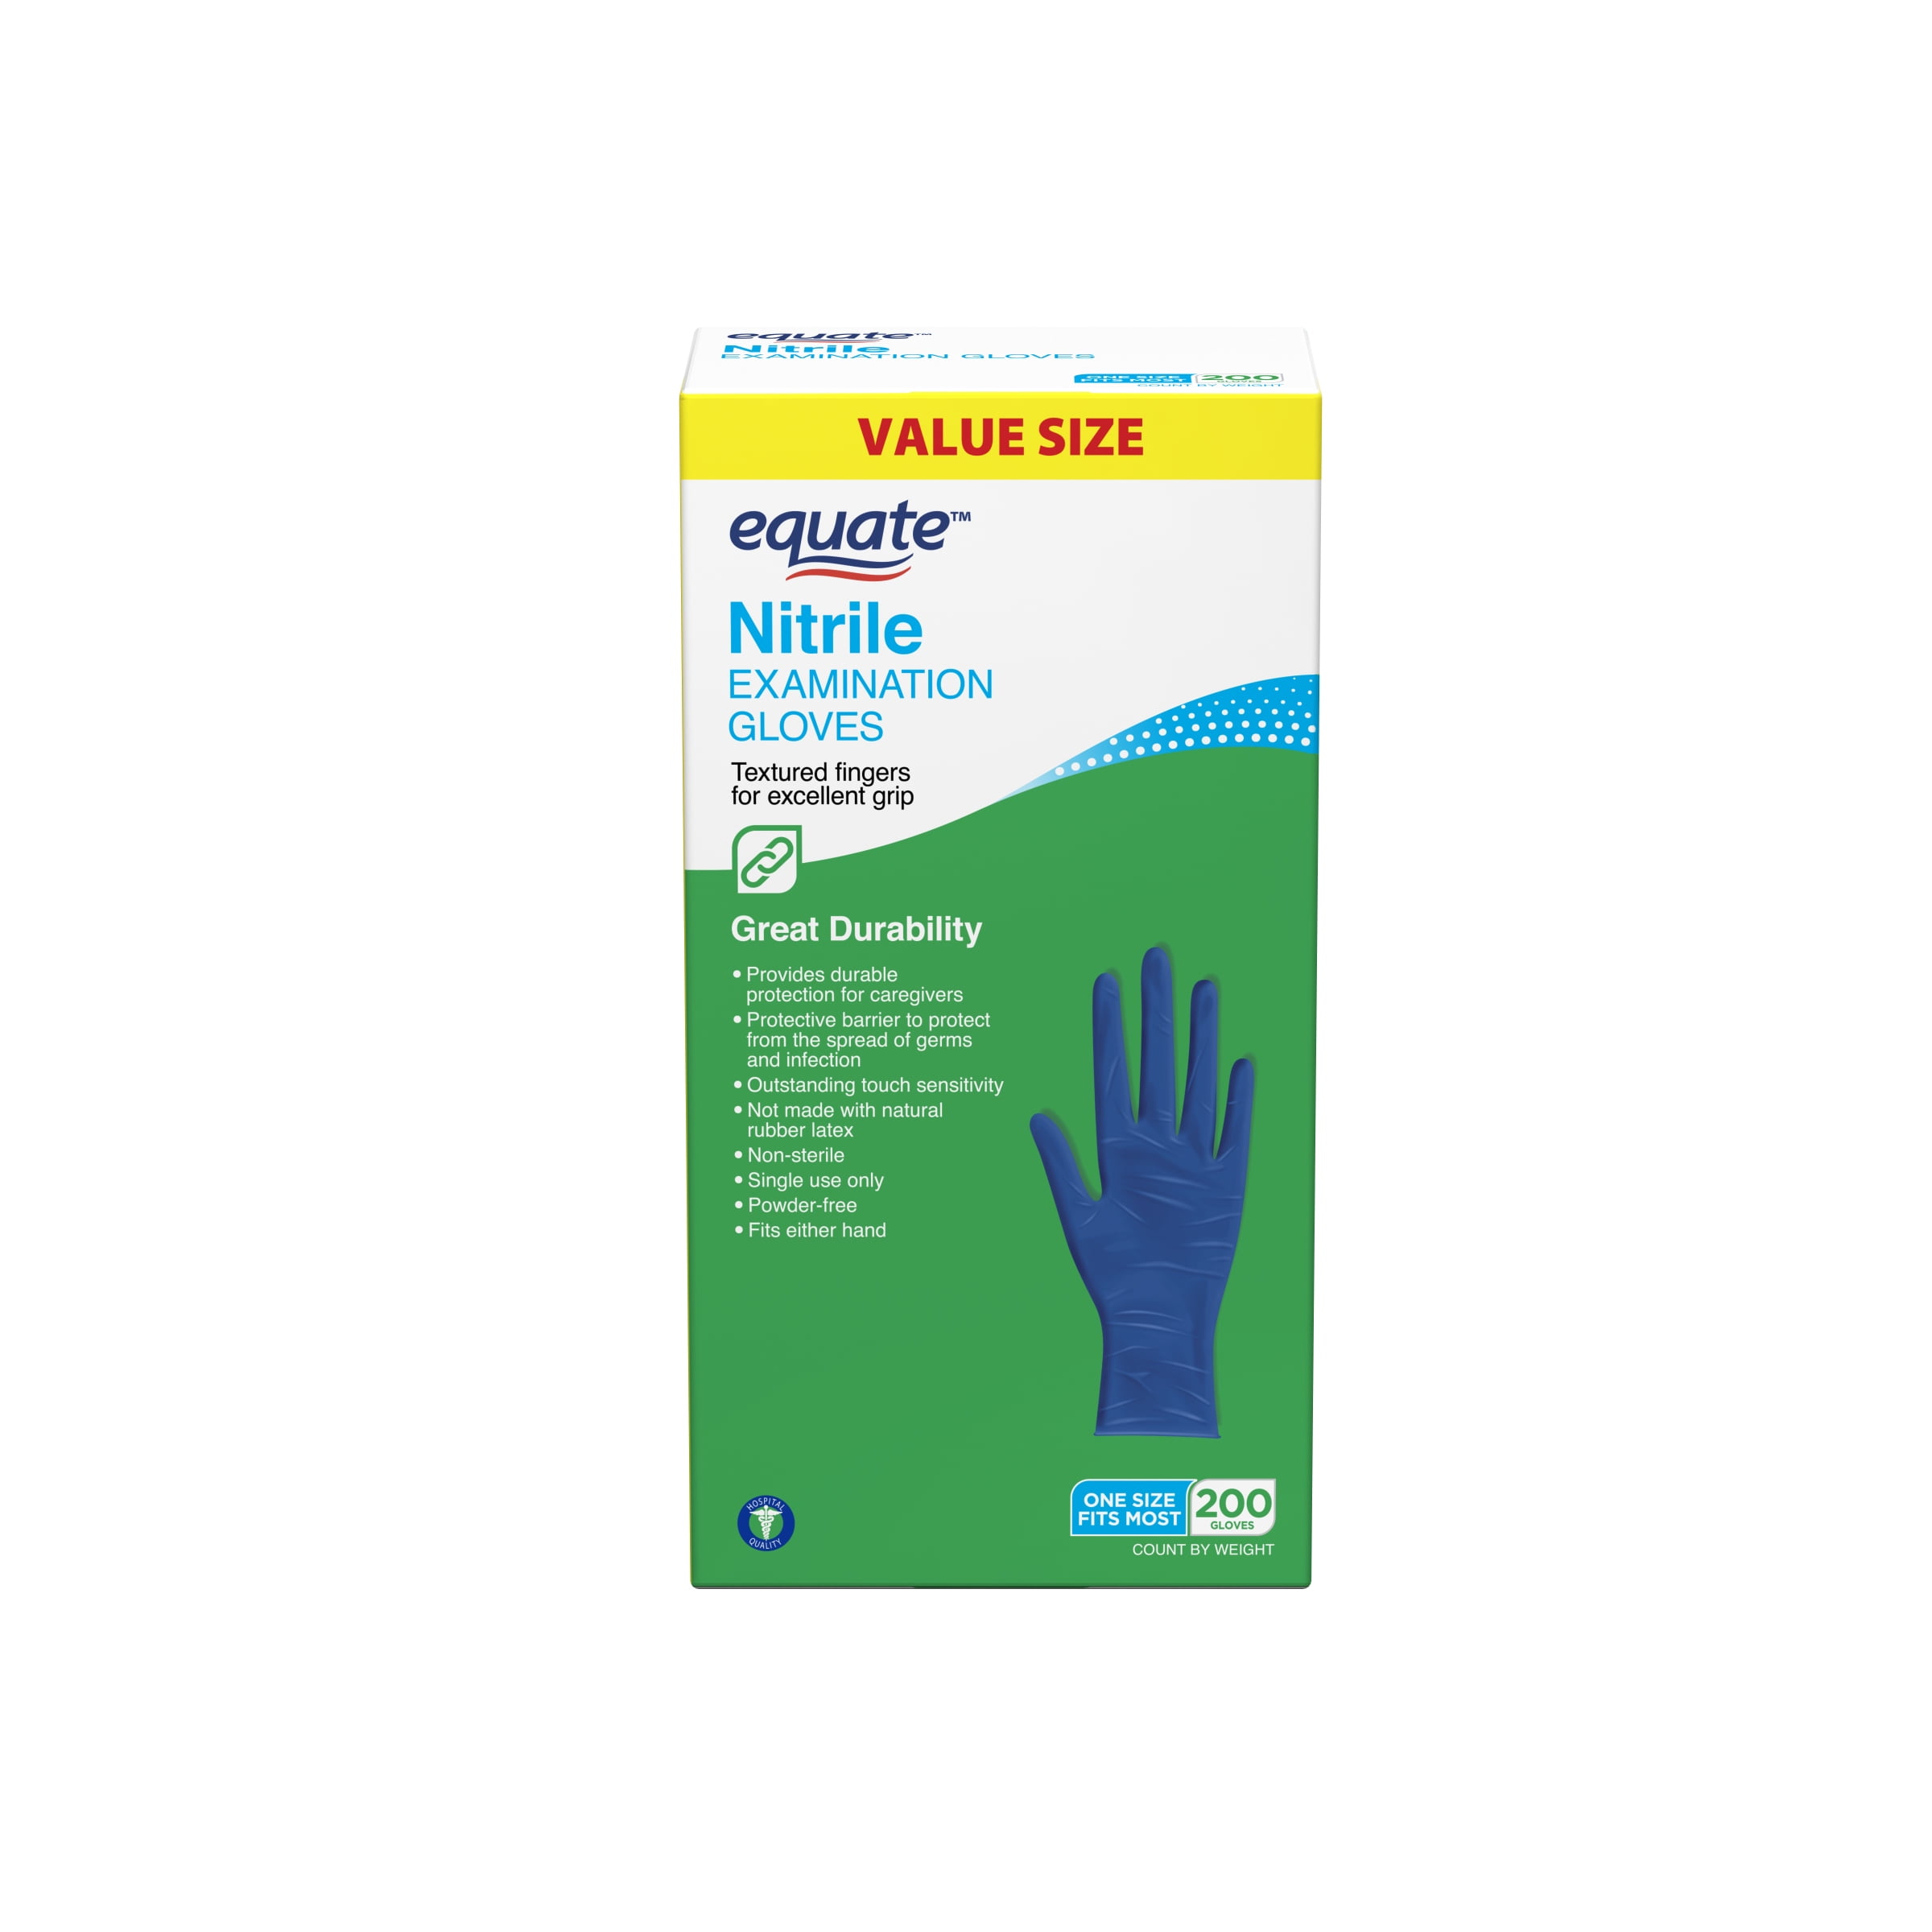 EQUATE NITRILE EXAM GLOVES, ONE SIZE FITS MOST, 200 COUNT